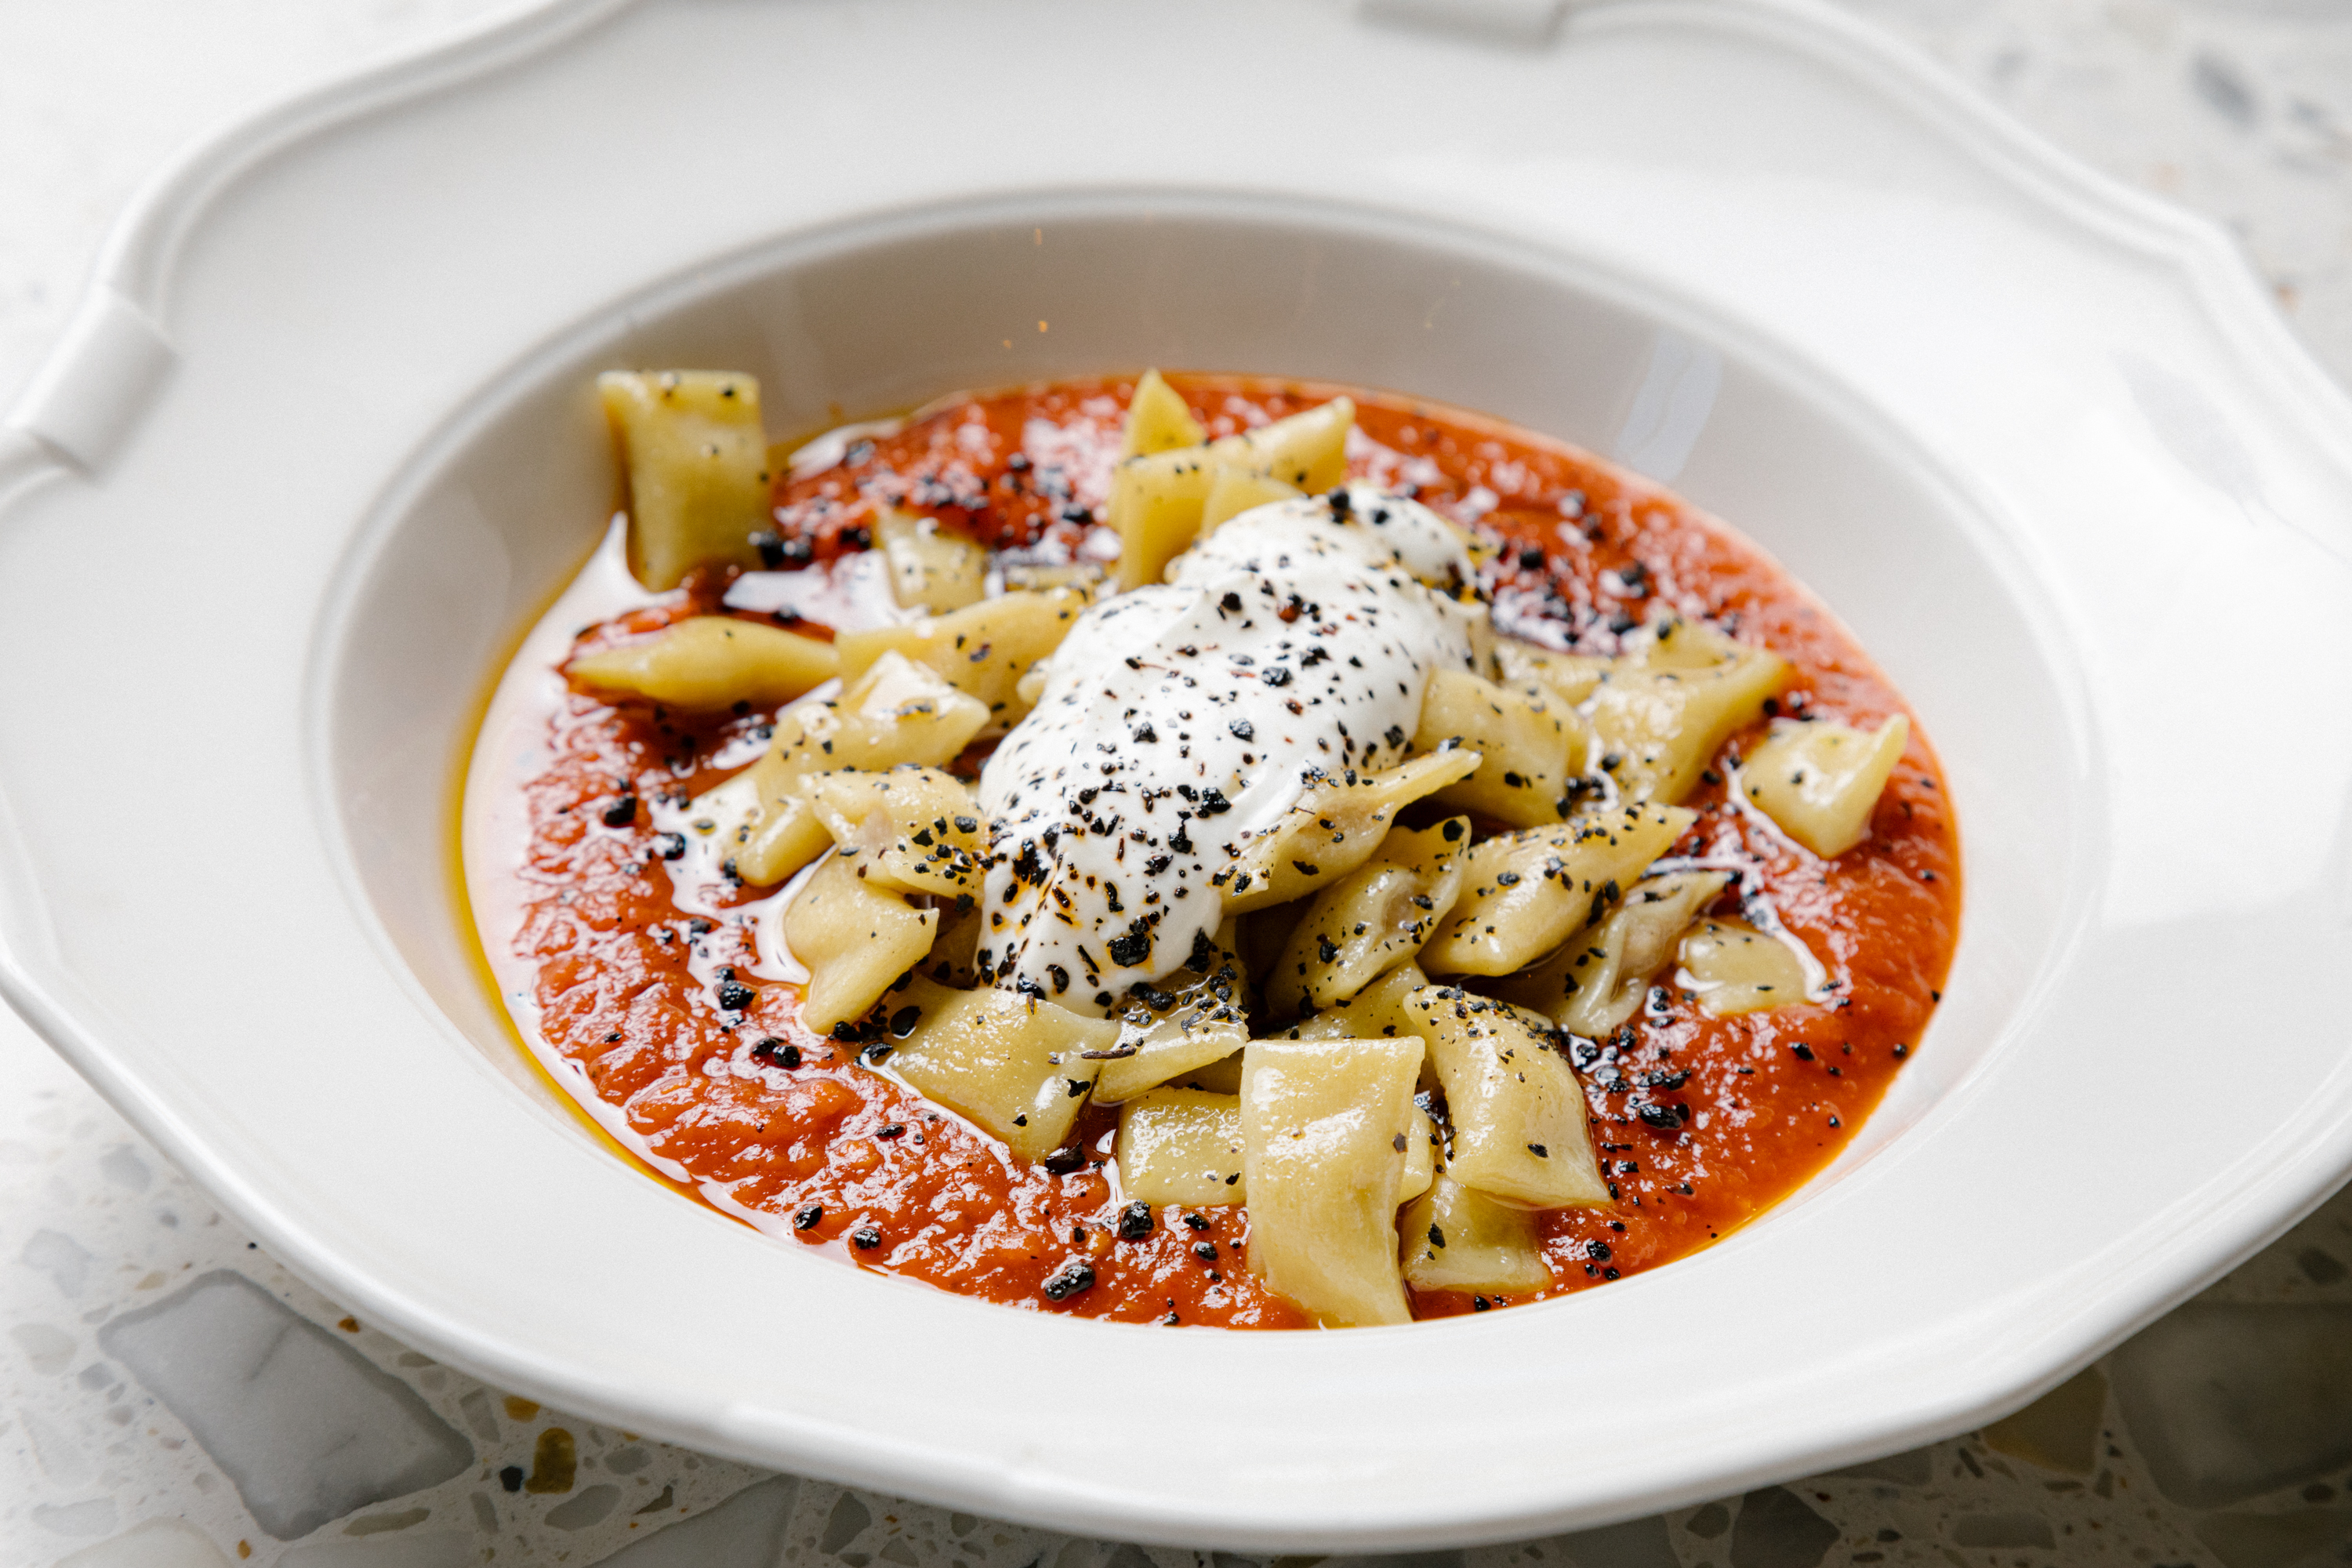 A close up photo of a pasta dish called “Kayseri Manti” which included small butter-roasted lamb pasta dumplings spread out on a white, ceramic dish with a large garlic yogurt in the center resting in red tomato sauce.